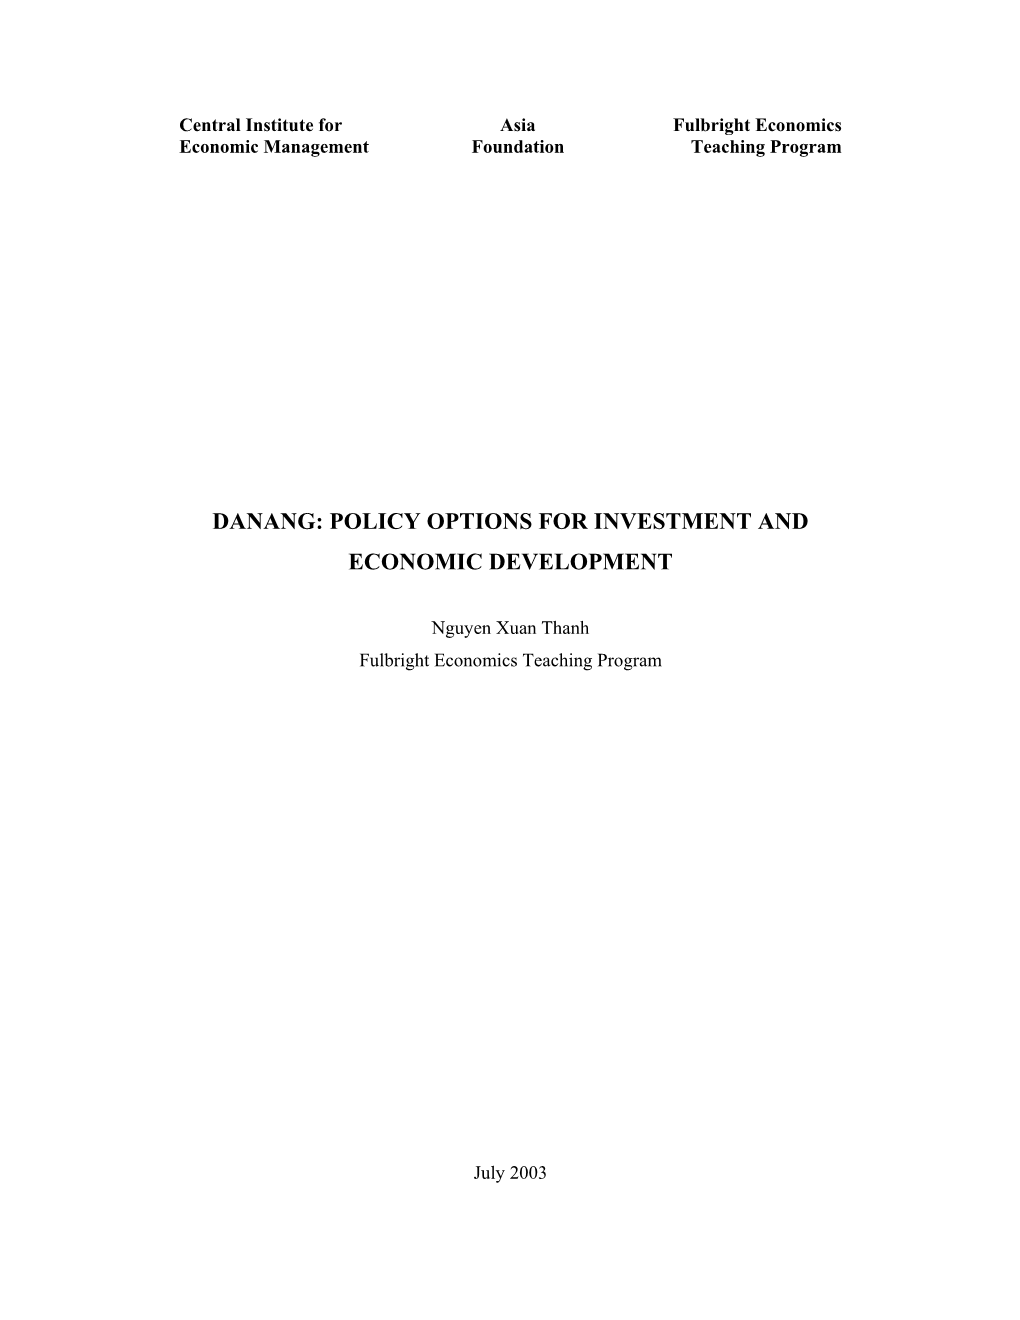 Danang: Policy Options for Investment and Economic Development